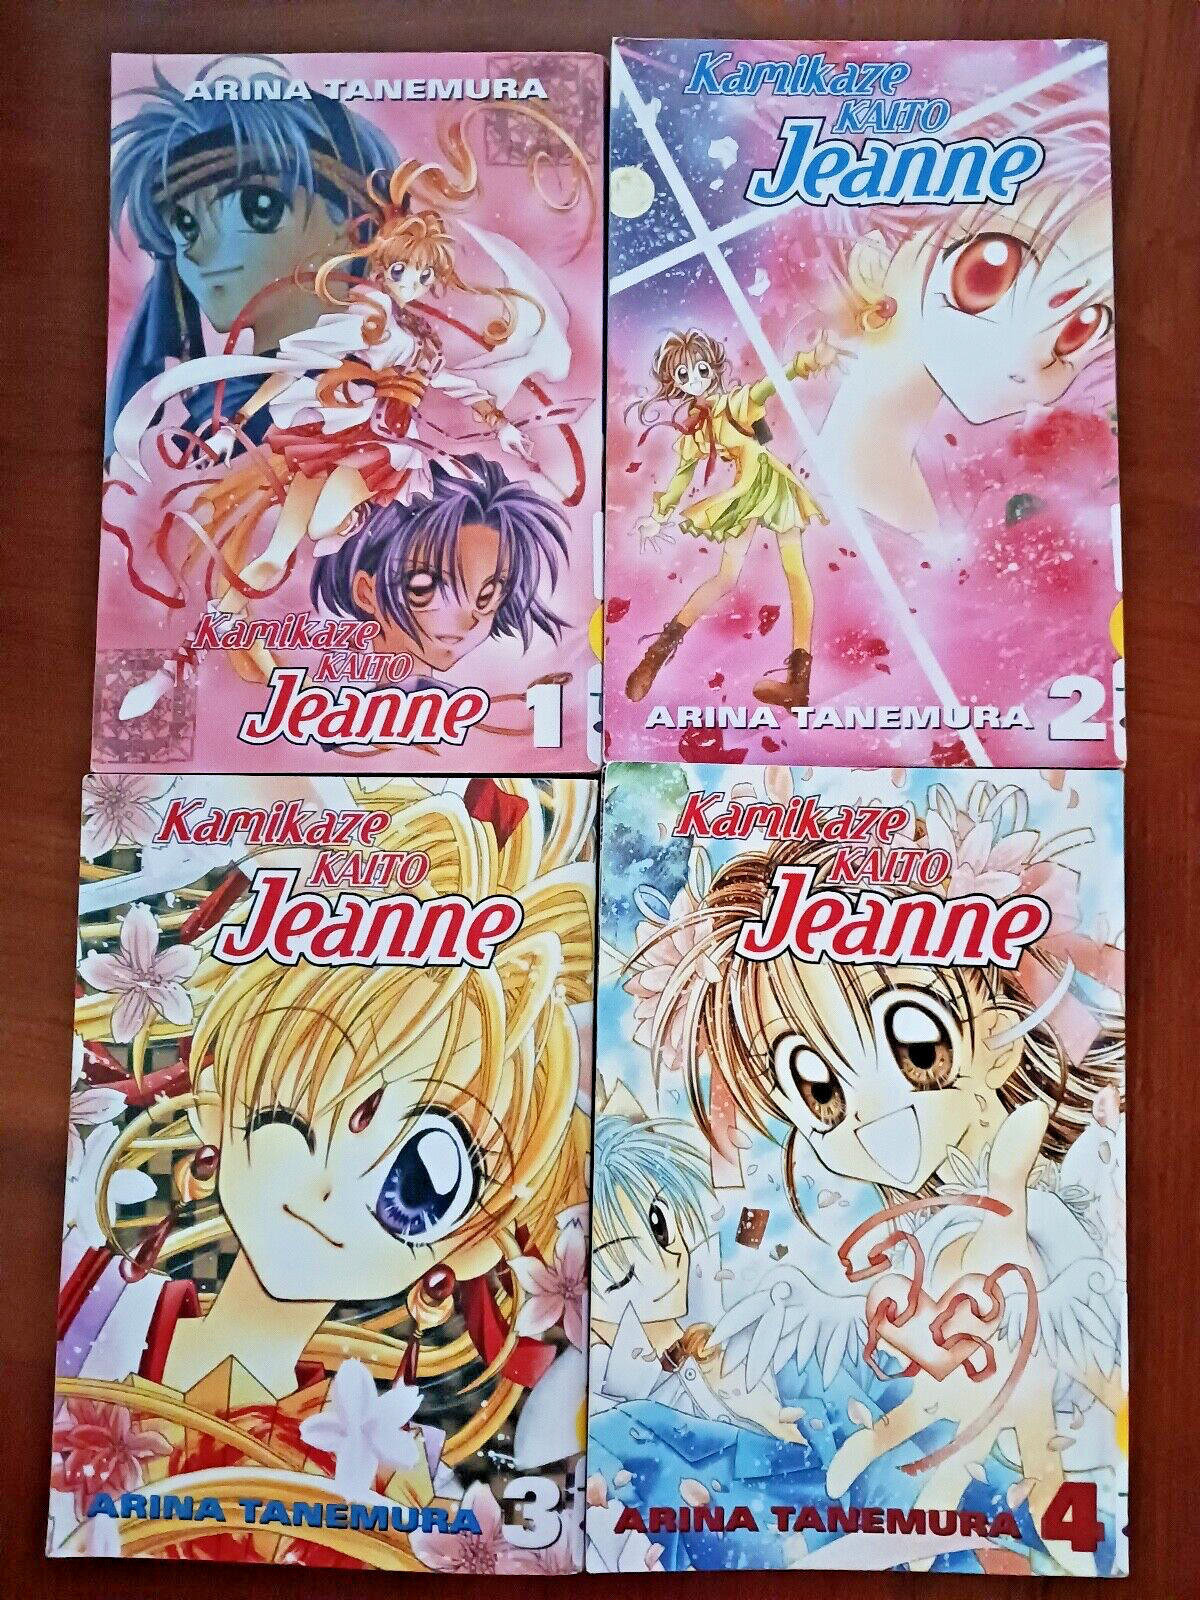 Kamikaze Kaito Jeanne Lot of 4 Volumes 1, 2, 3, 4  by Ariana Tanemura Ex Library